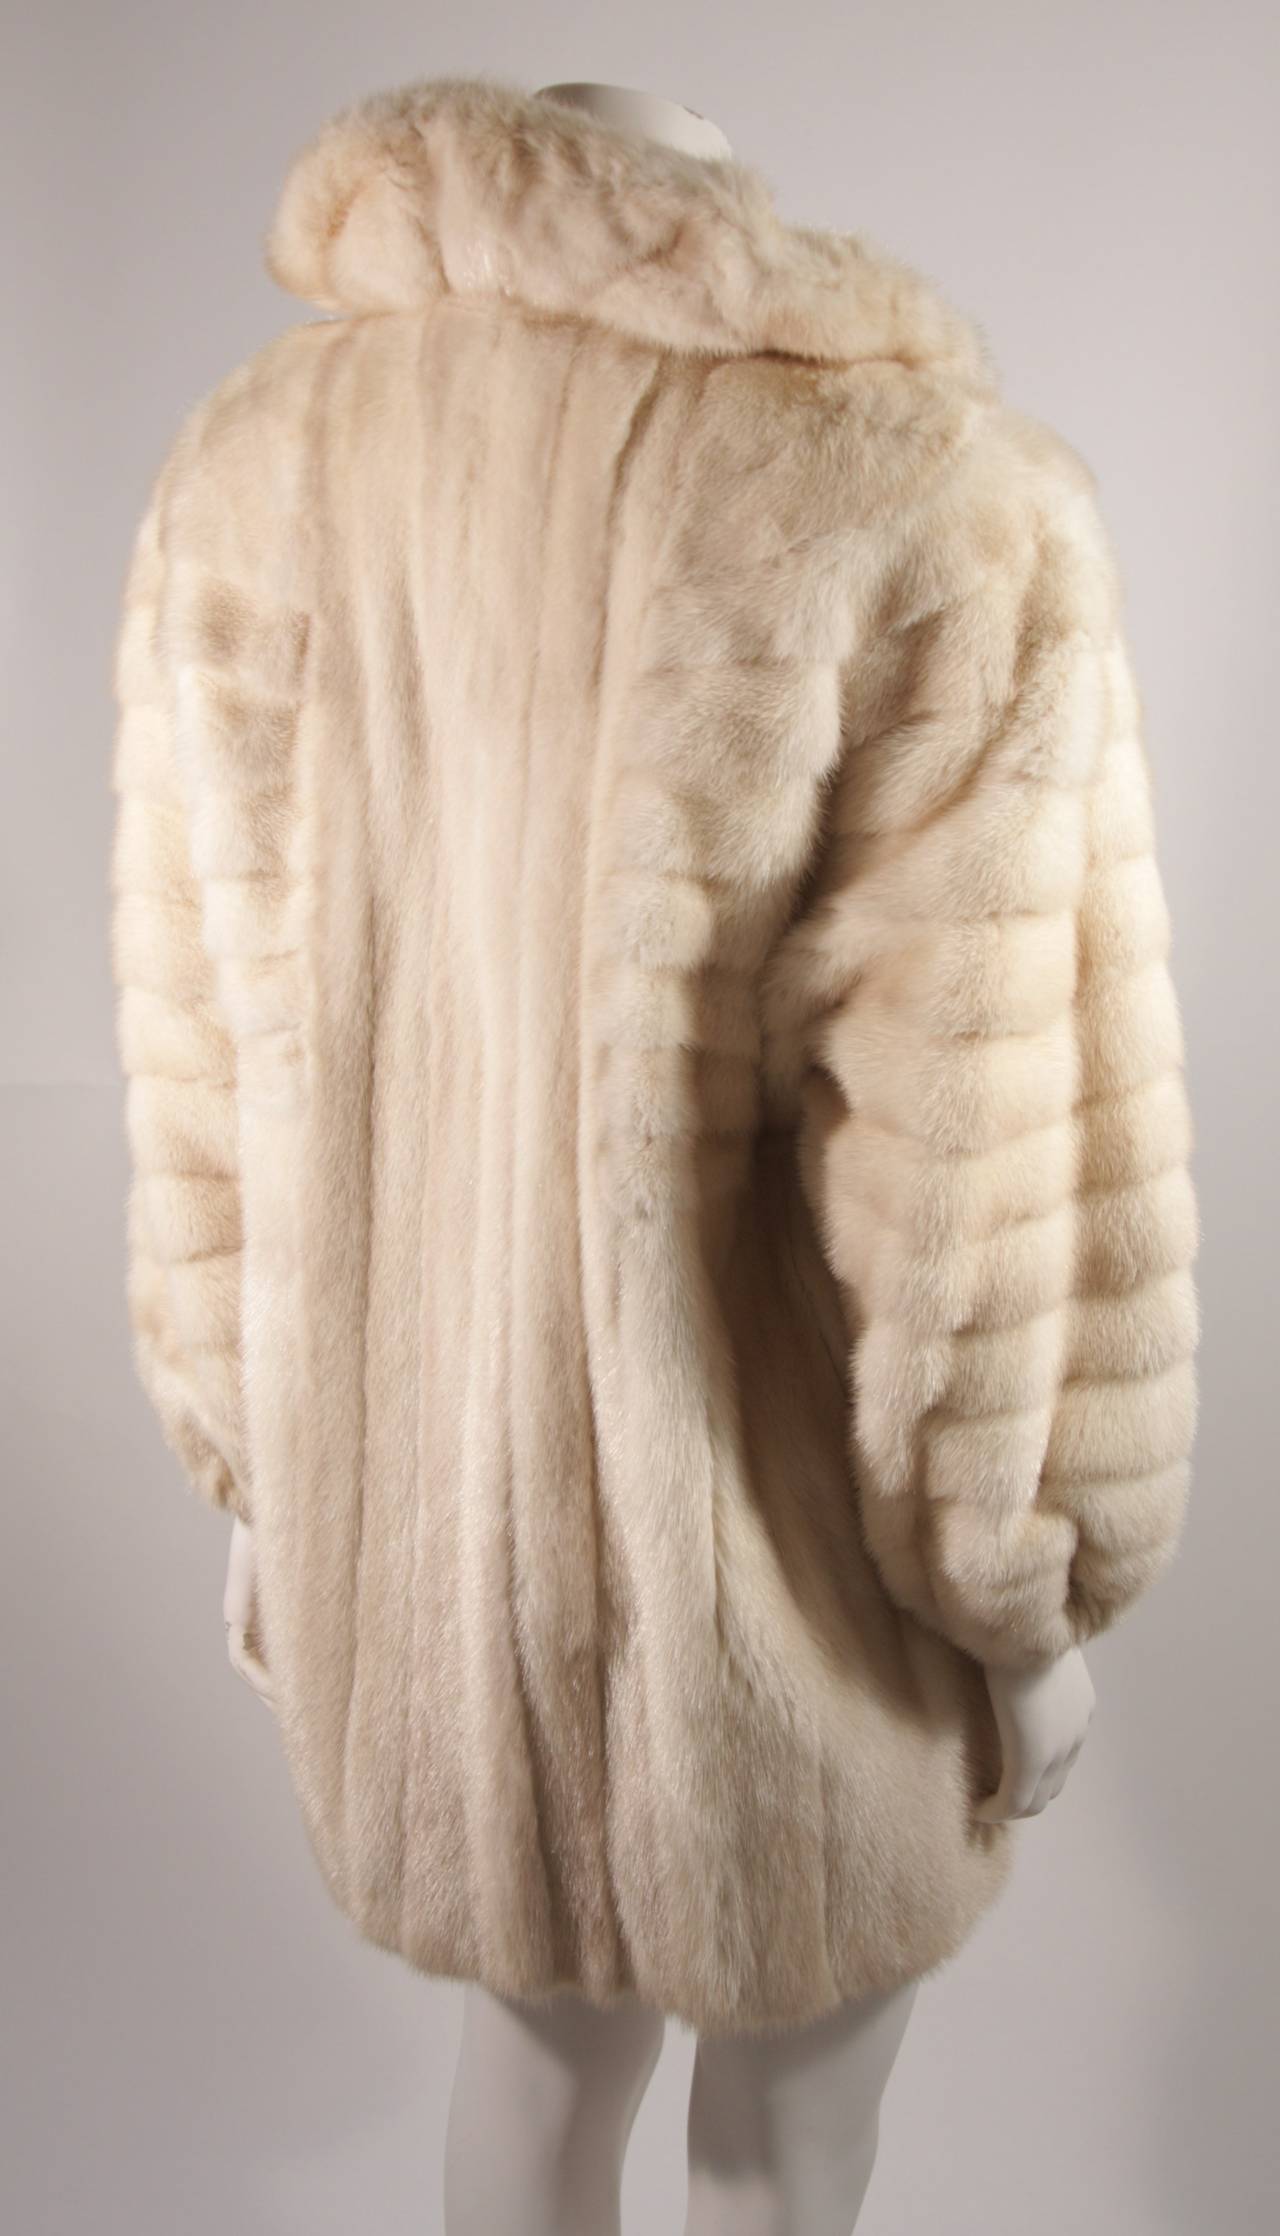 Galanos Ivory Mink Coat with Ruffle Tie Collar and Full Sleeves & Stretch cuff For Sale 3